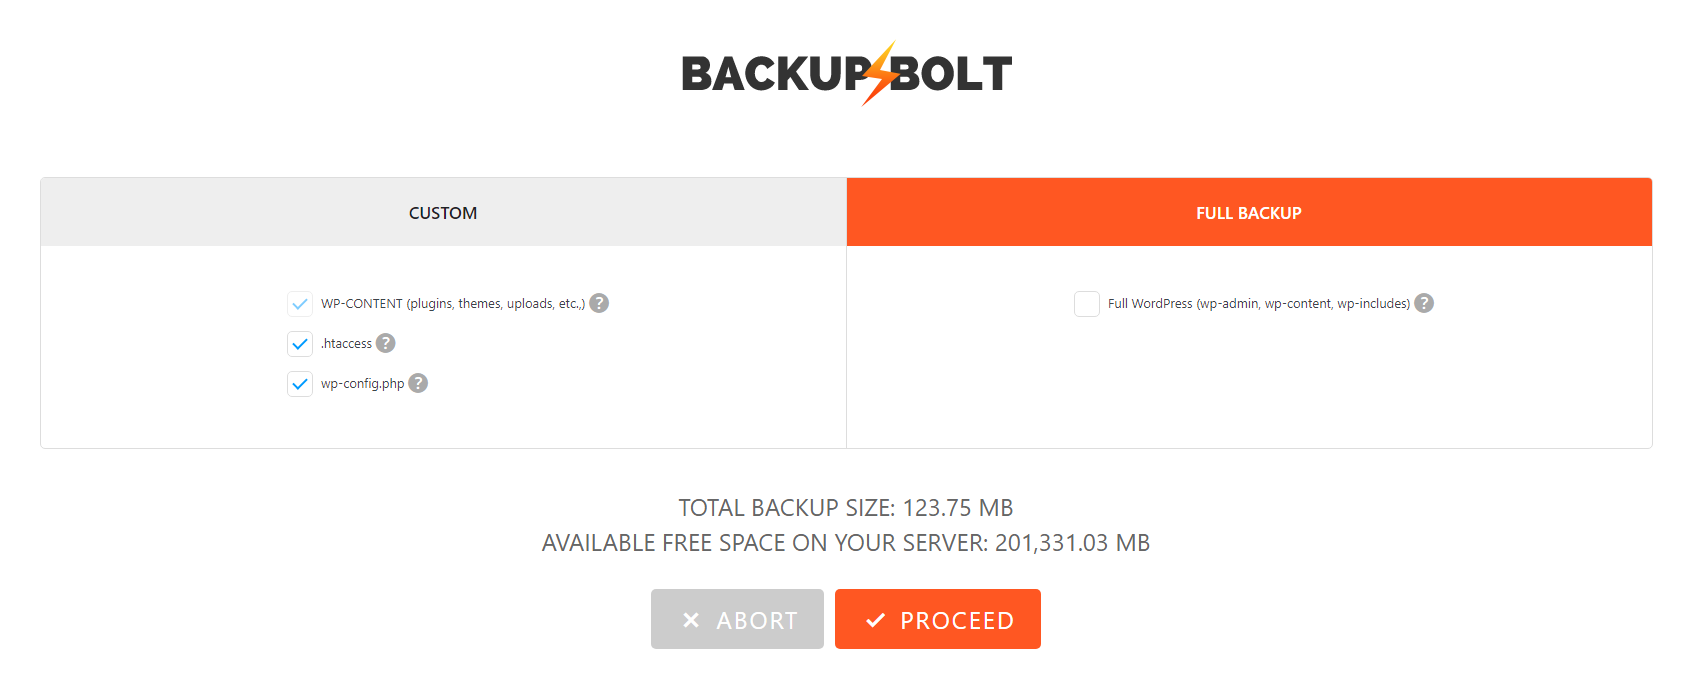 Backup size and free memory size calculation before initiating backup process